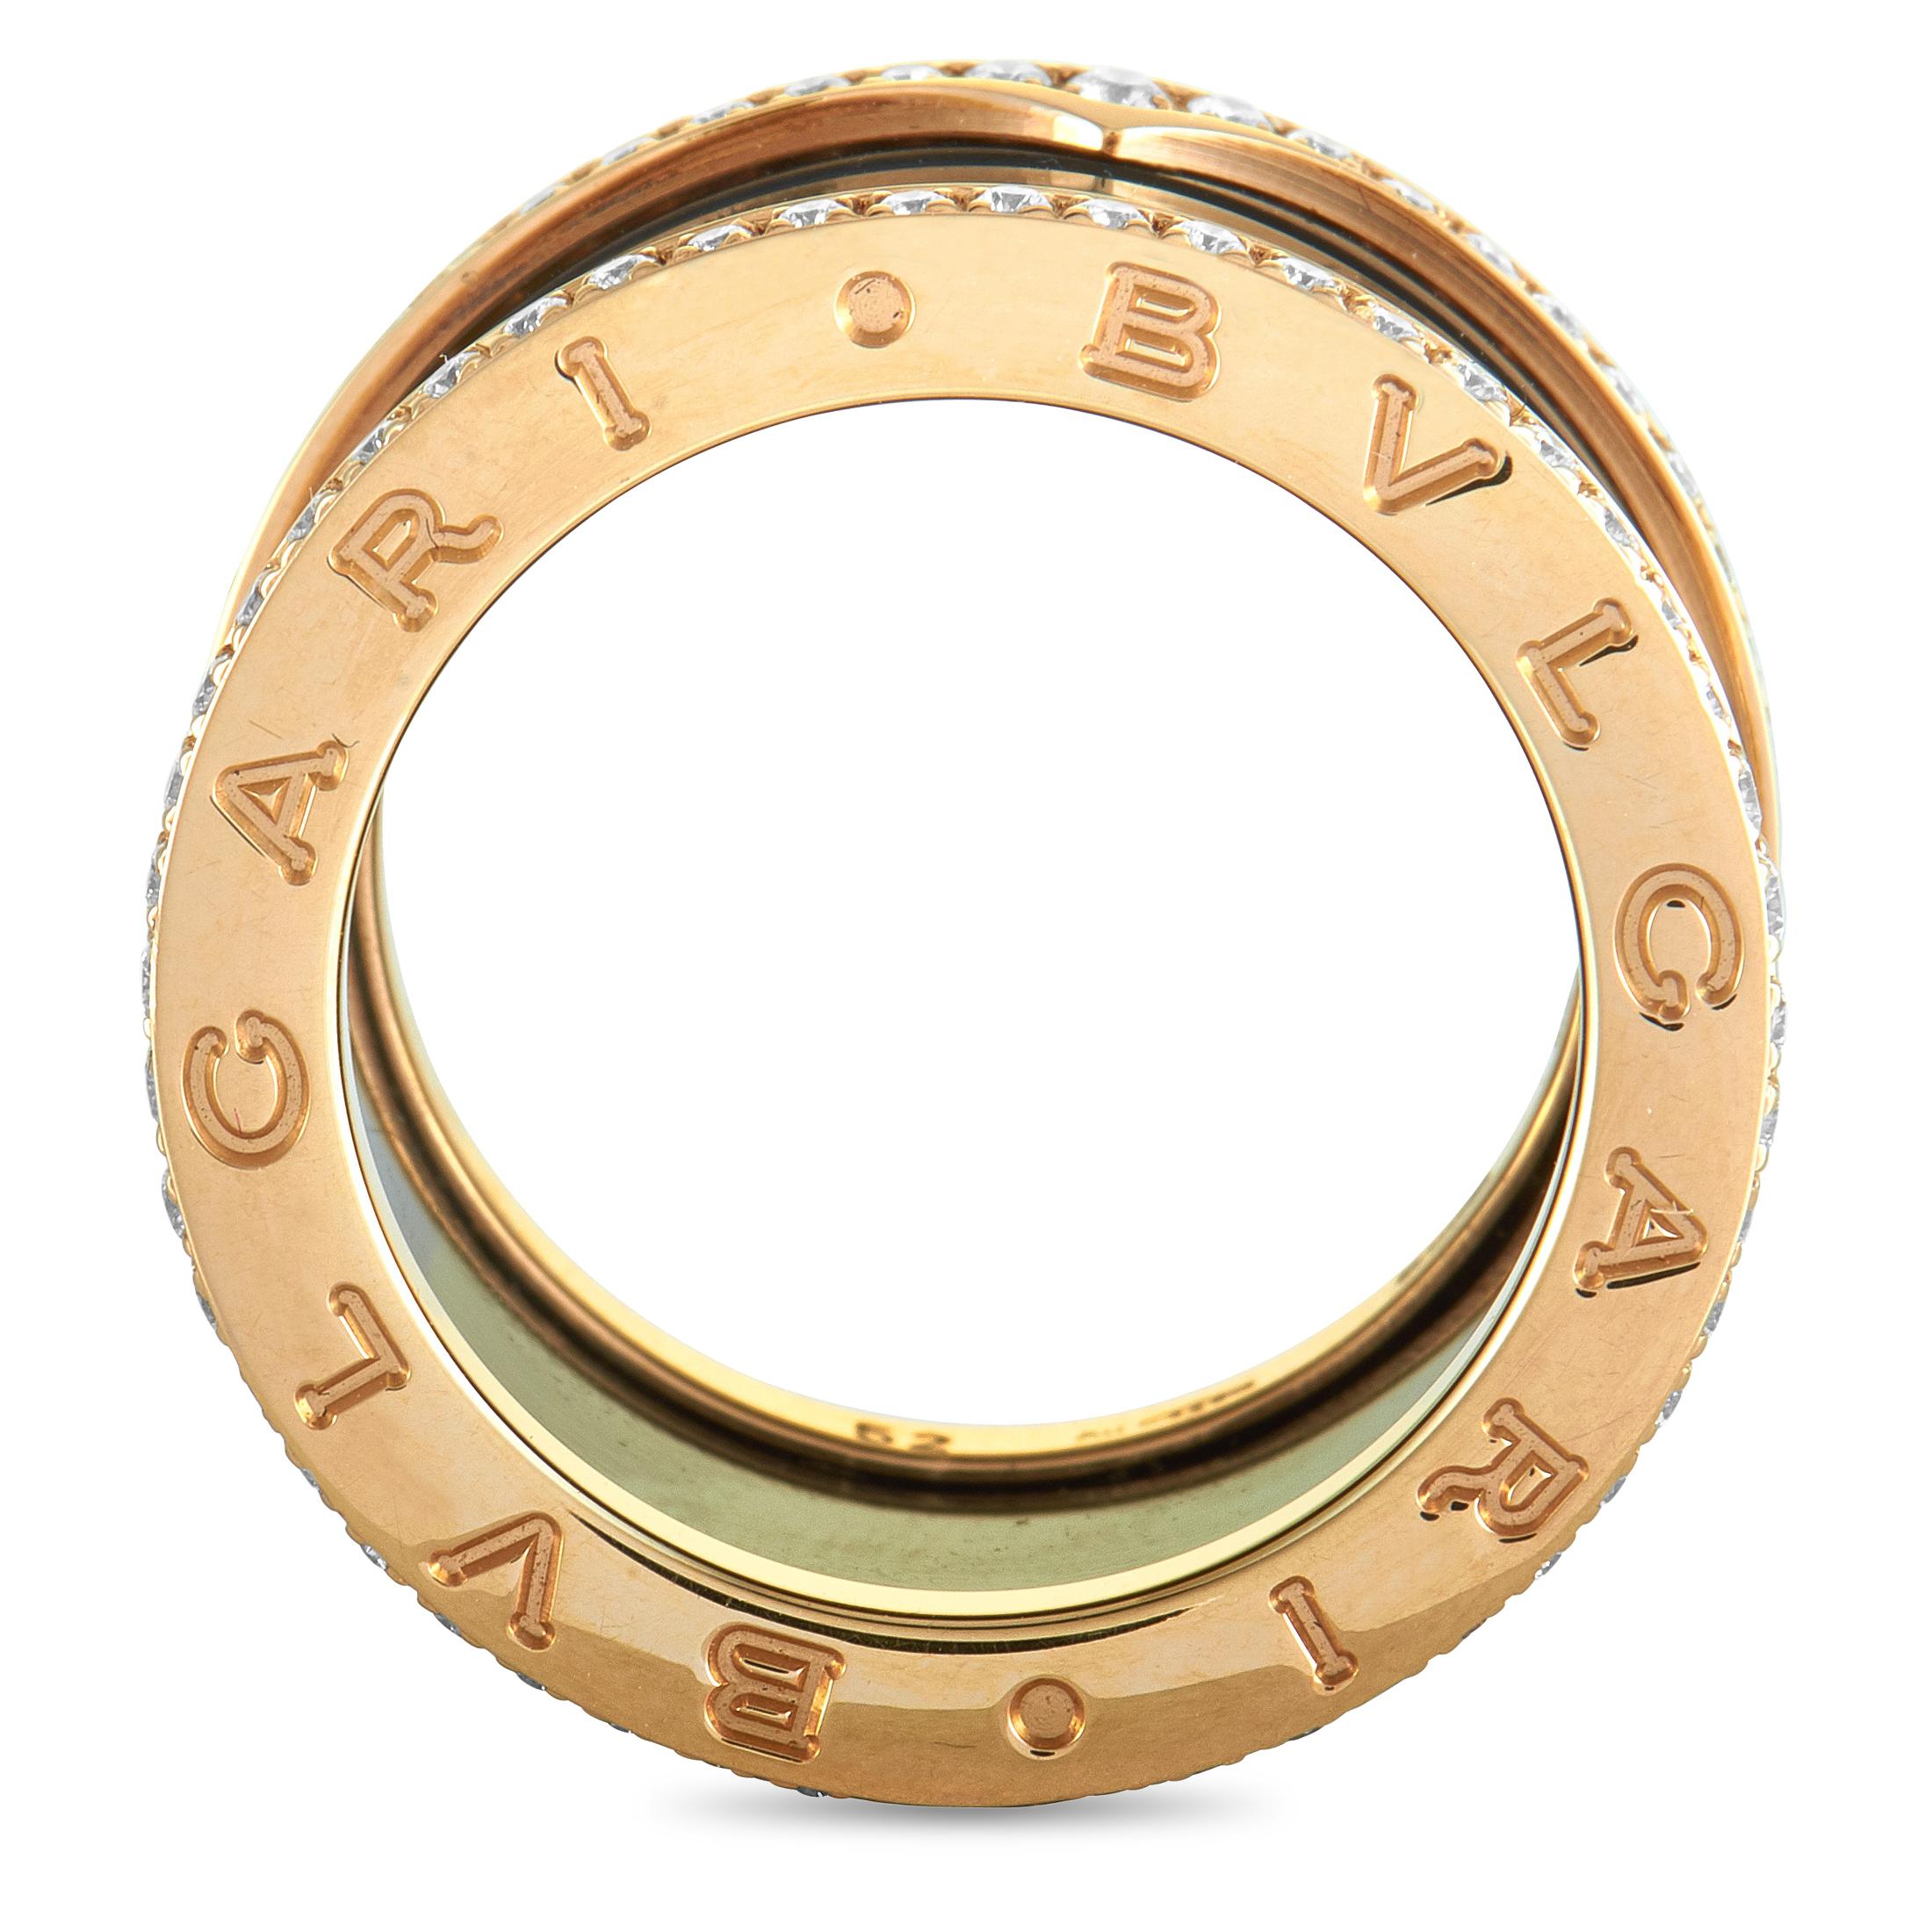 The Bvlgari “B.zero1” ring is made out of 18K rose gold and black ceramic and it is embellished with diamonds. The ring weighs 8.8 grams and boasts band thickness of 12 mm.
Ring Size: 5.75

This jewelry piece is offered in brand new condition and